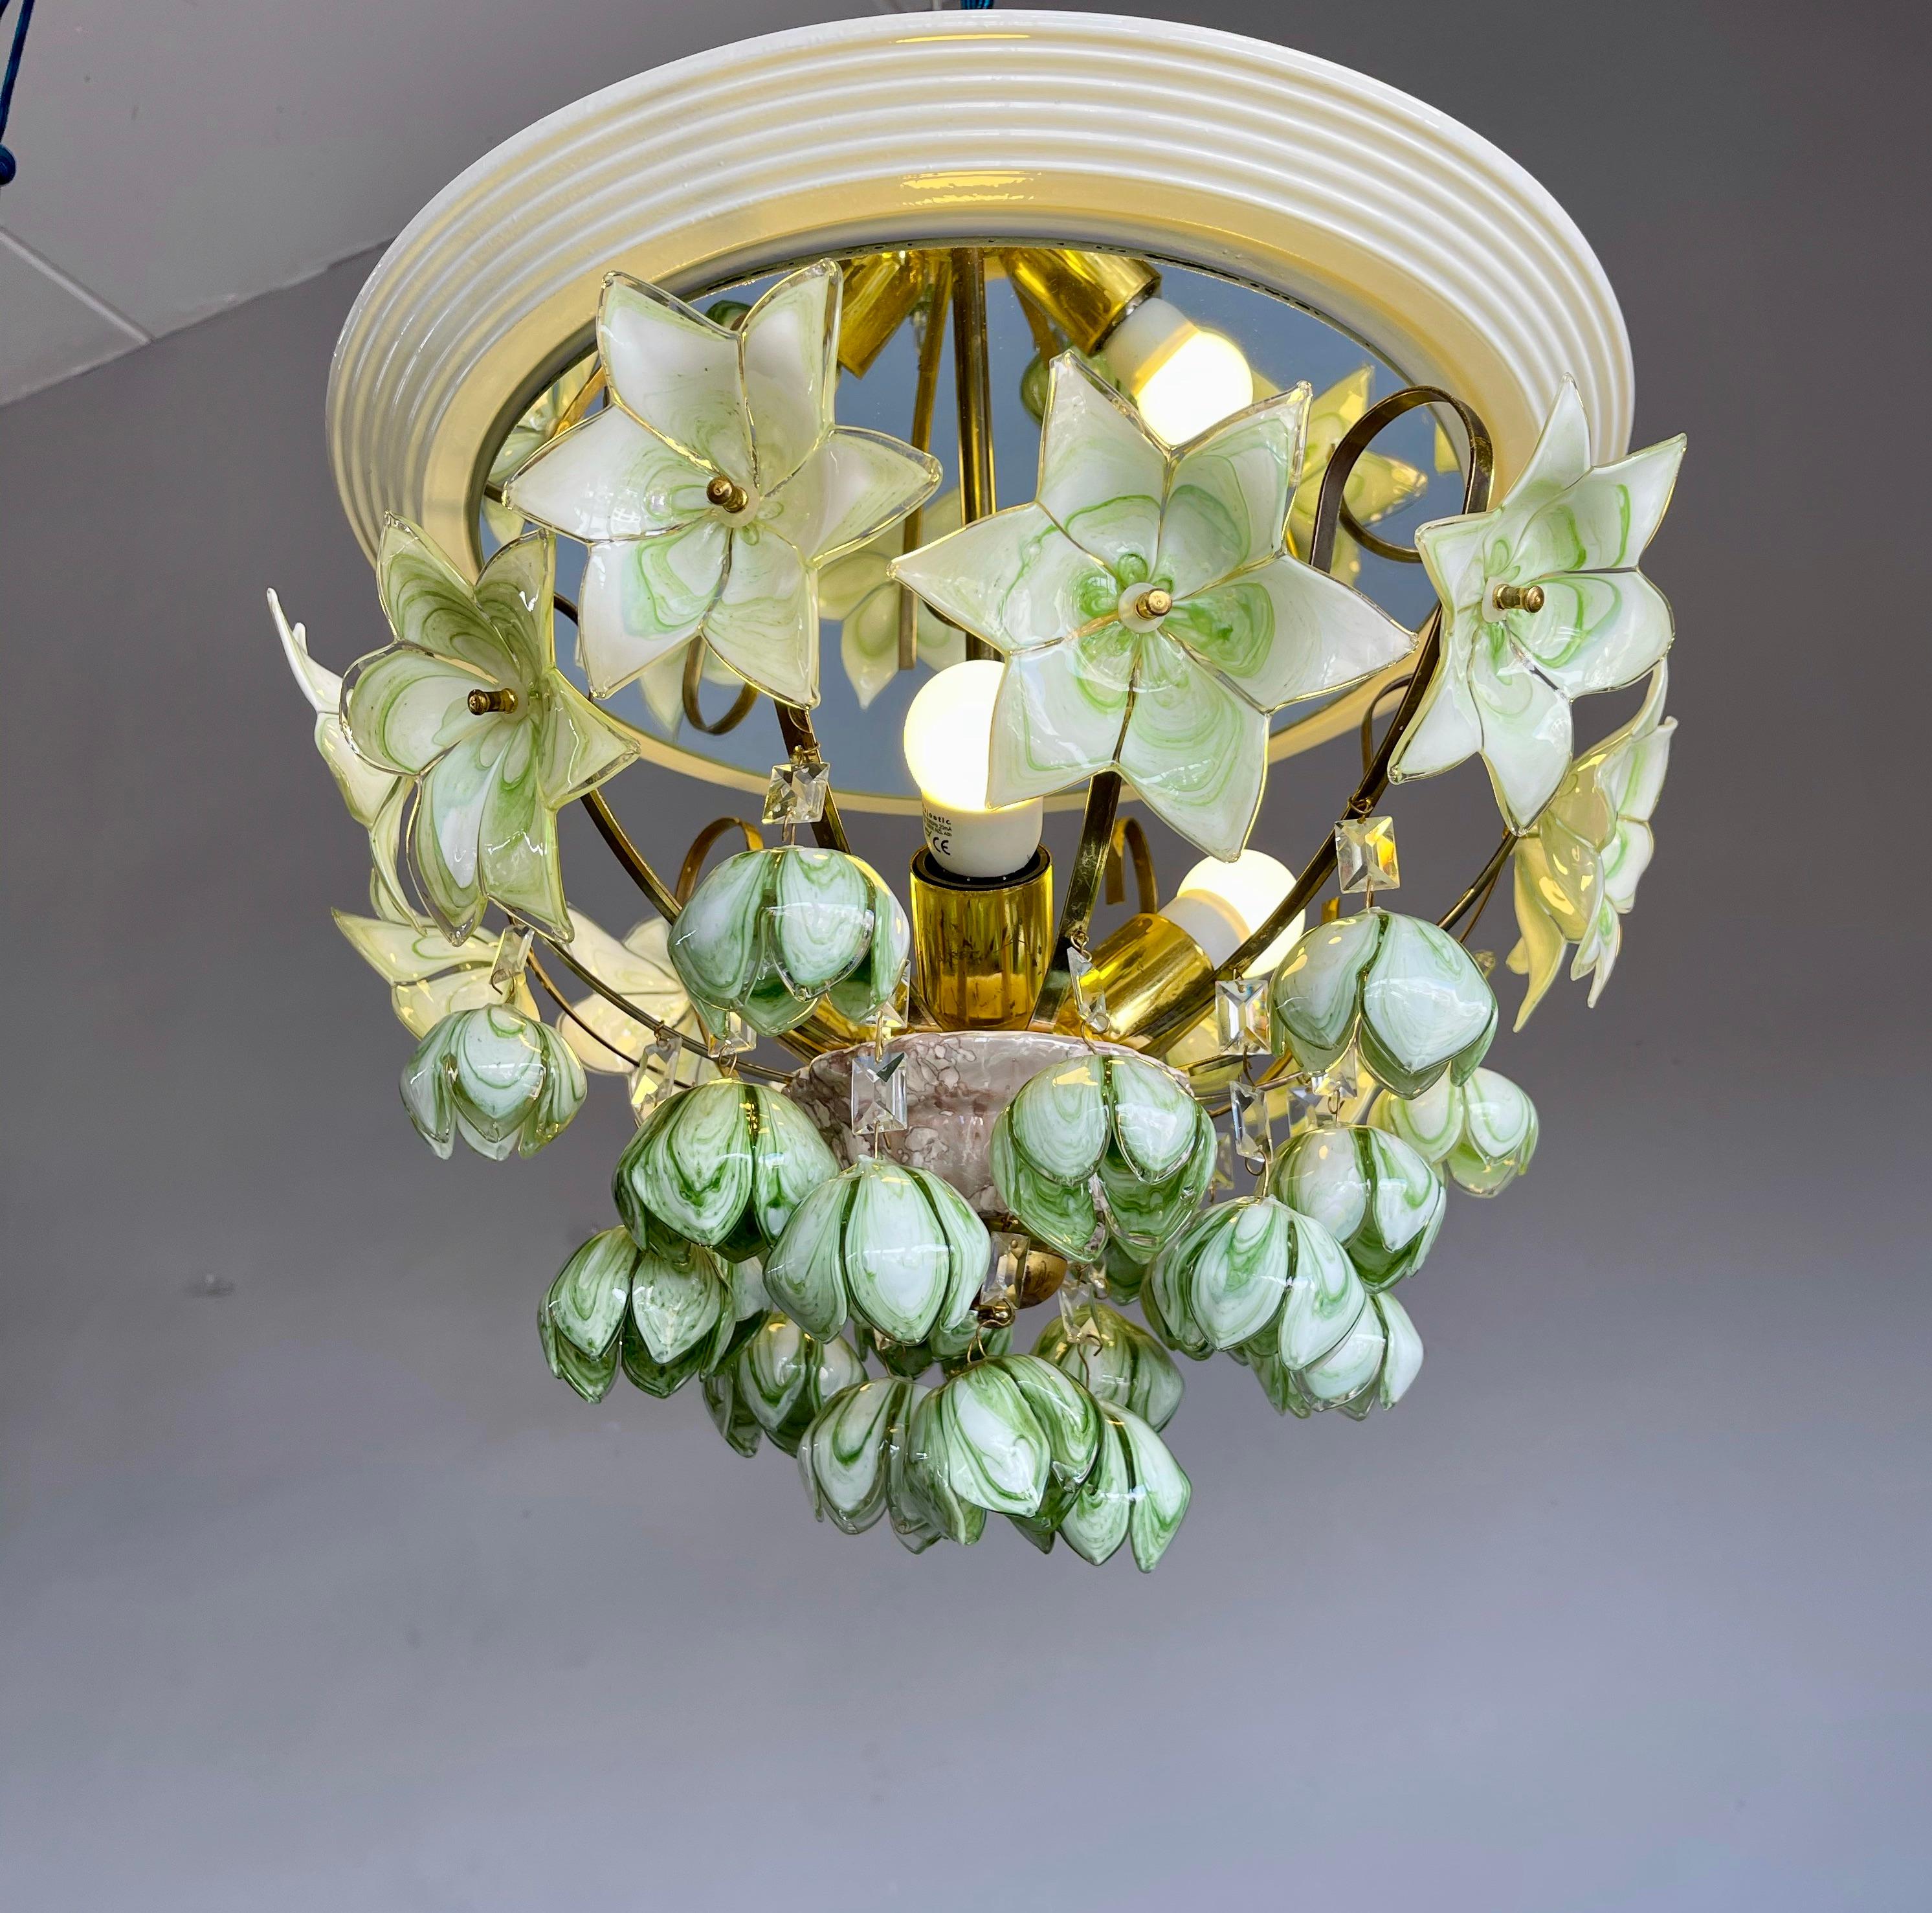 Mouth blown green glass flower bouquet light fixture with integrated ceiling mirror.

If you are looking for a striking and extraordinary light fixture to grace your living space then this, Italian work of lighting art could be the one for you. This